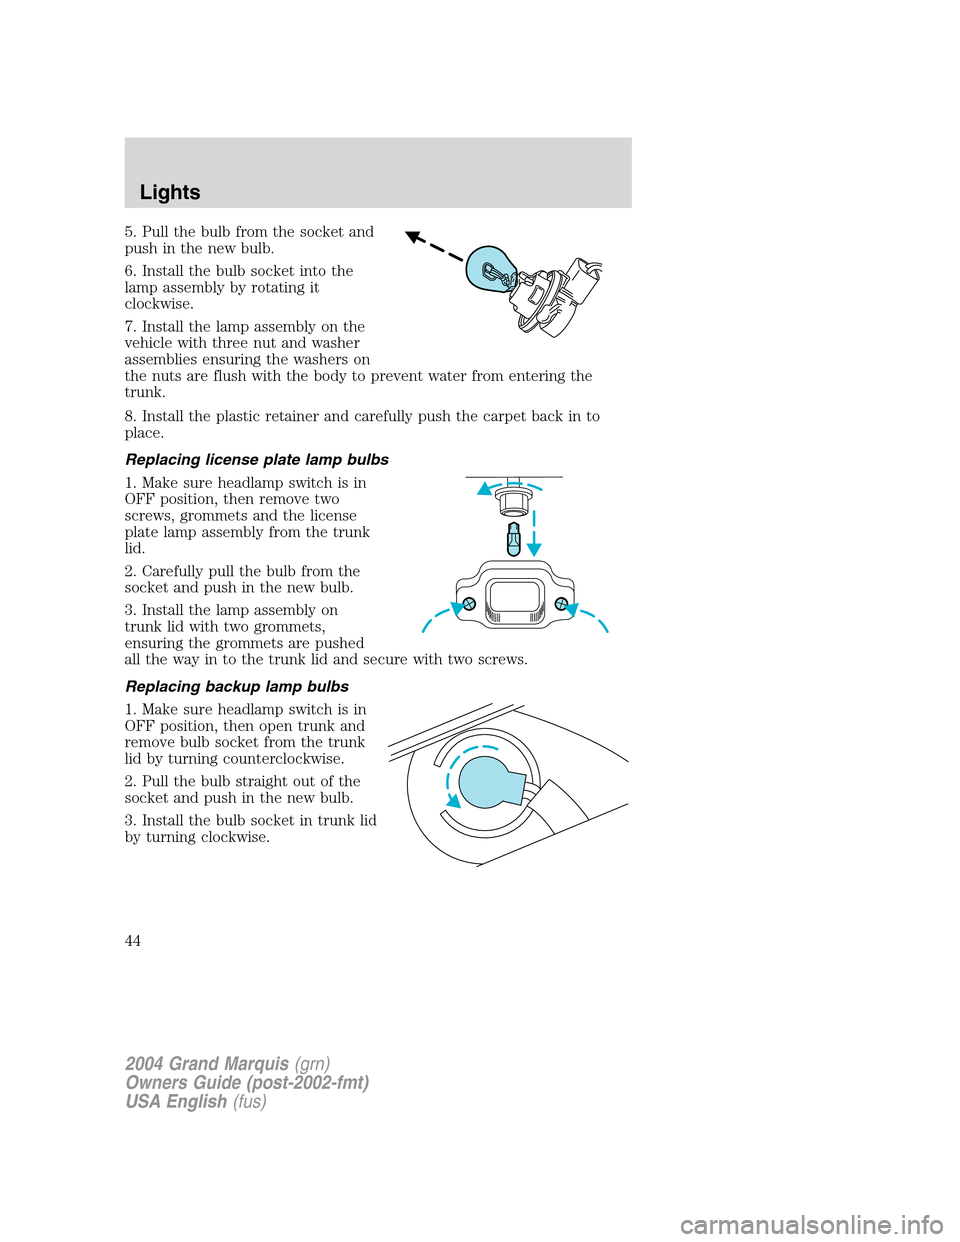 Mercury Grand Marquis 2004  s Service Manual 5. Pull the bulb from the socket and
push in the new bulb.
6. Install the bulb socket into the
lamp assembly by rotating it
clockwise.
7. Install the lamp assembly on the
vehicle with three nut and wa